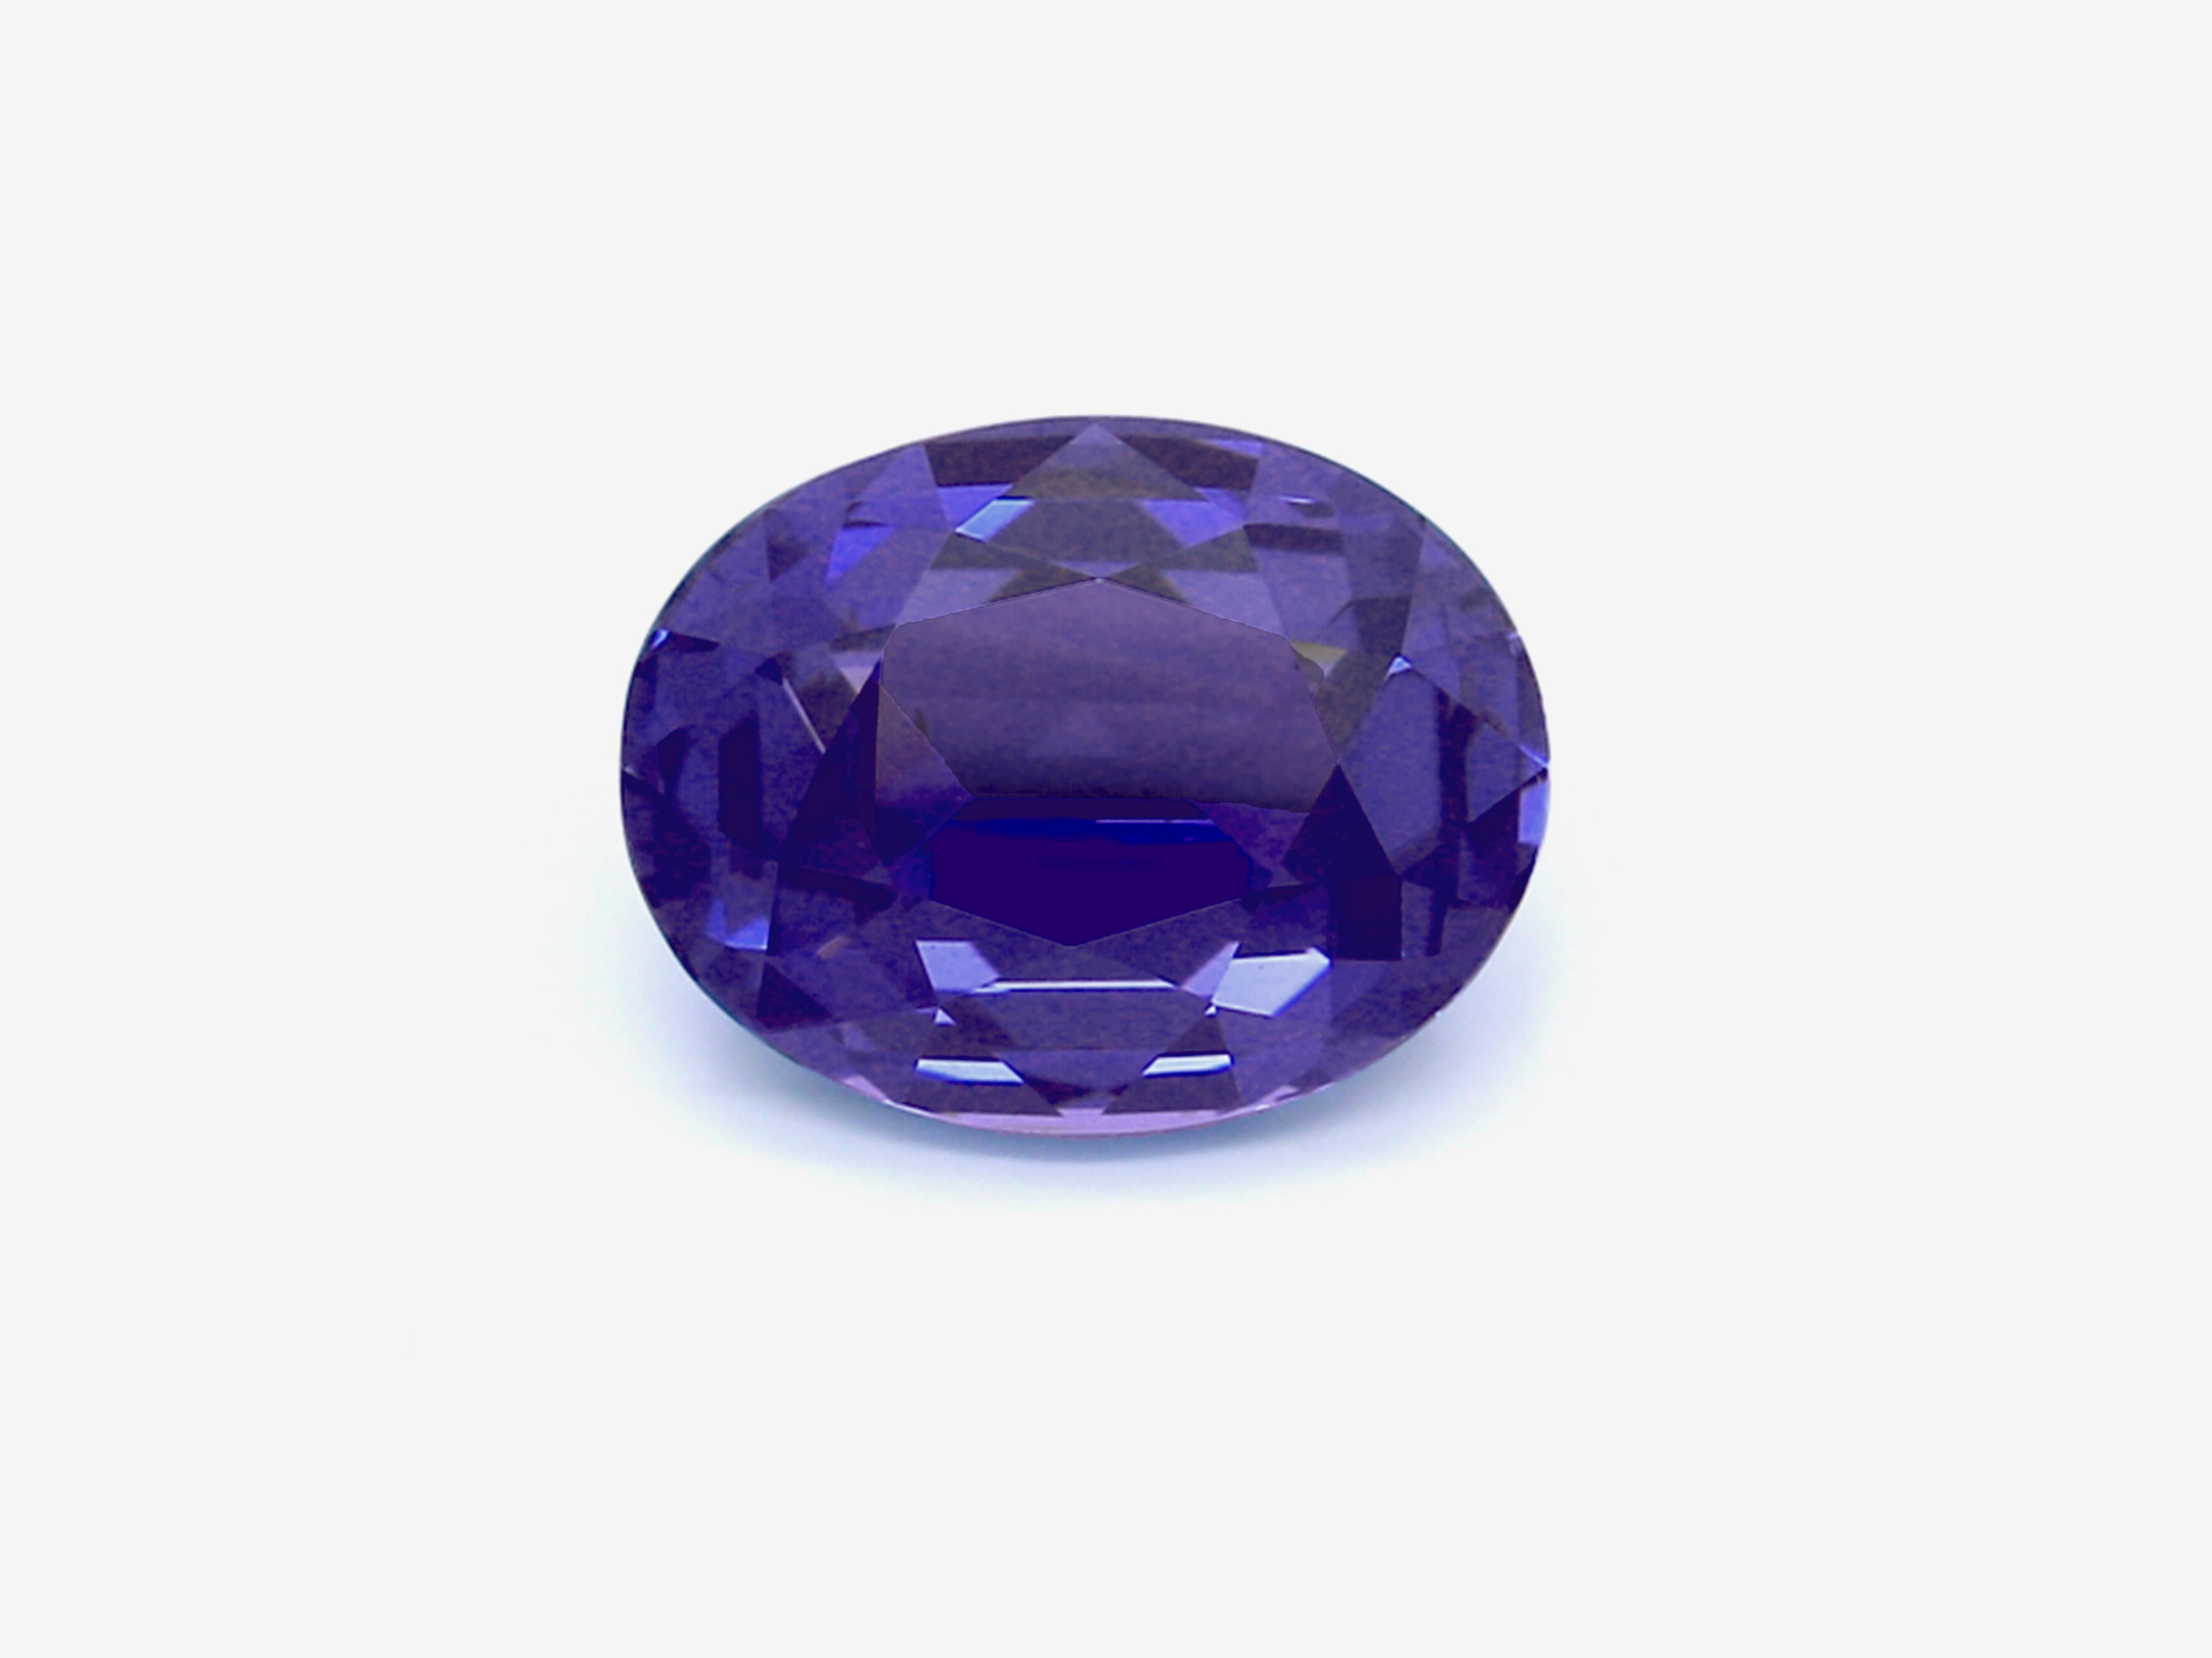 Stunning 5.65 carat no heat colour-changing oval blue spinel, displays a  beautiful violetish-blue colour under daylight. Spinel is hard and durable stone, making it the perfect stone for everyday wear. 

We specialise in colour gemstones and offer